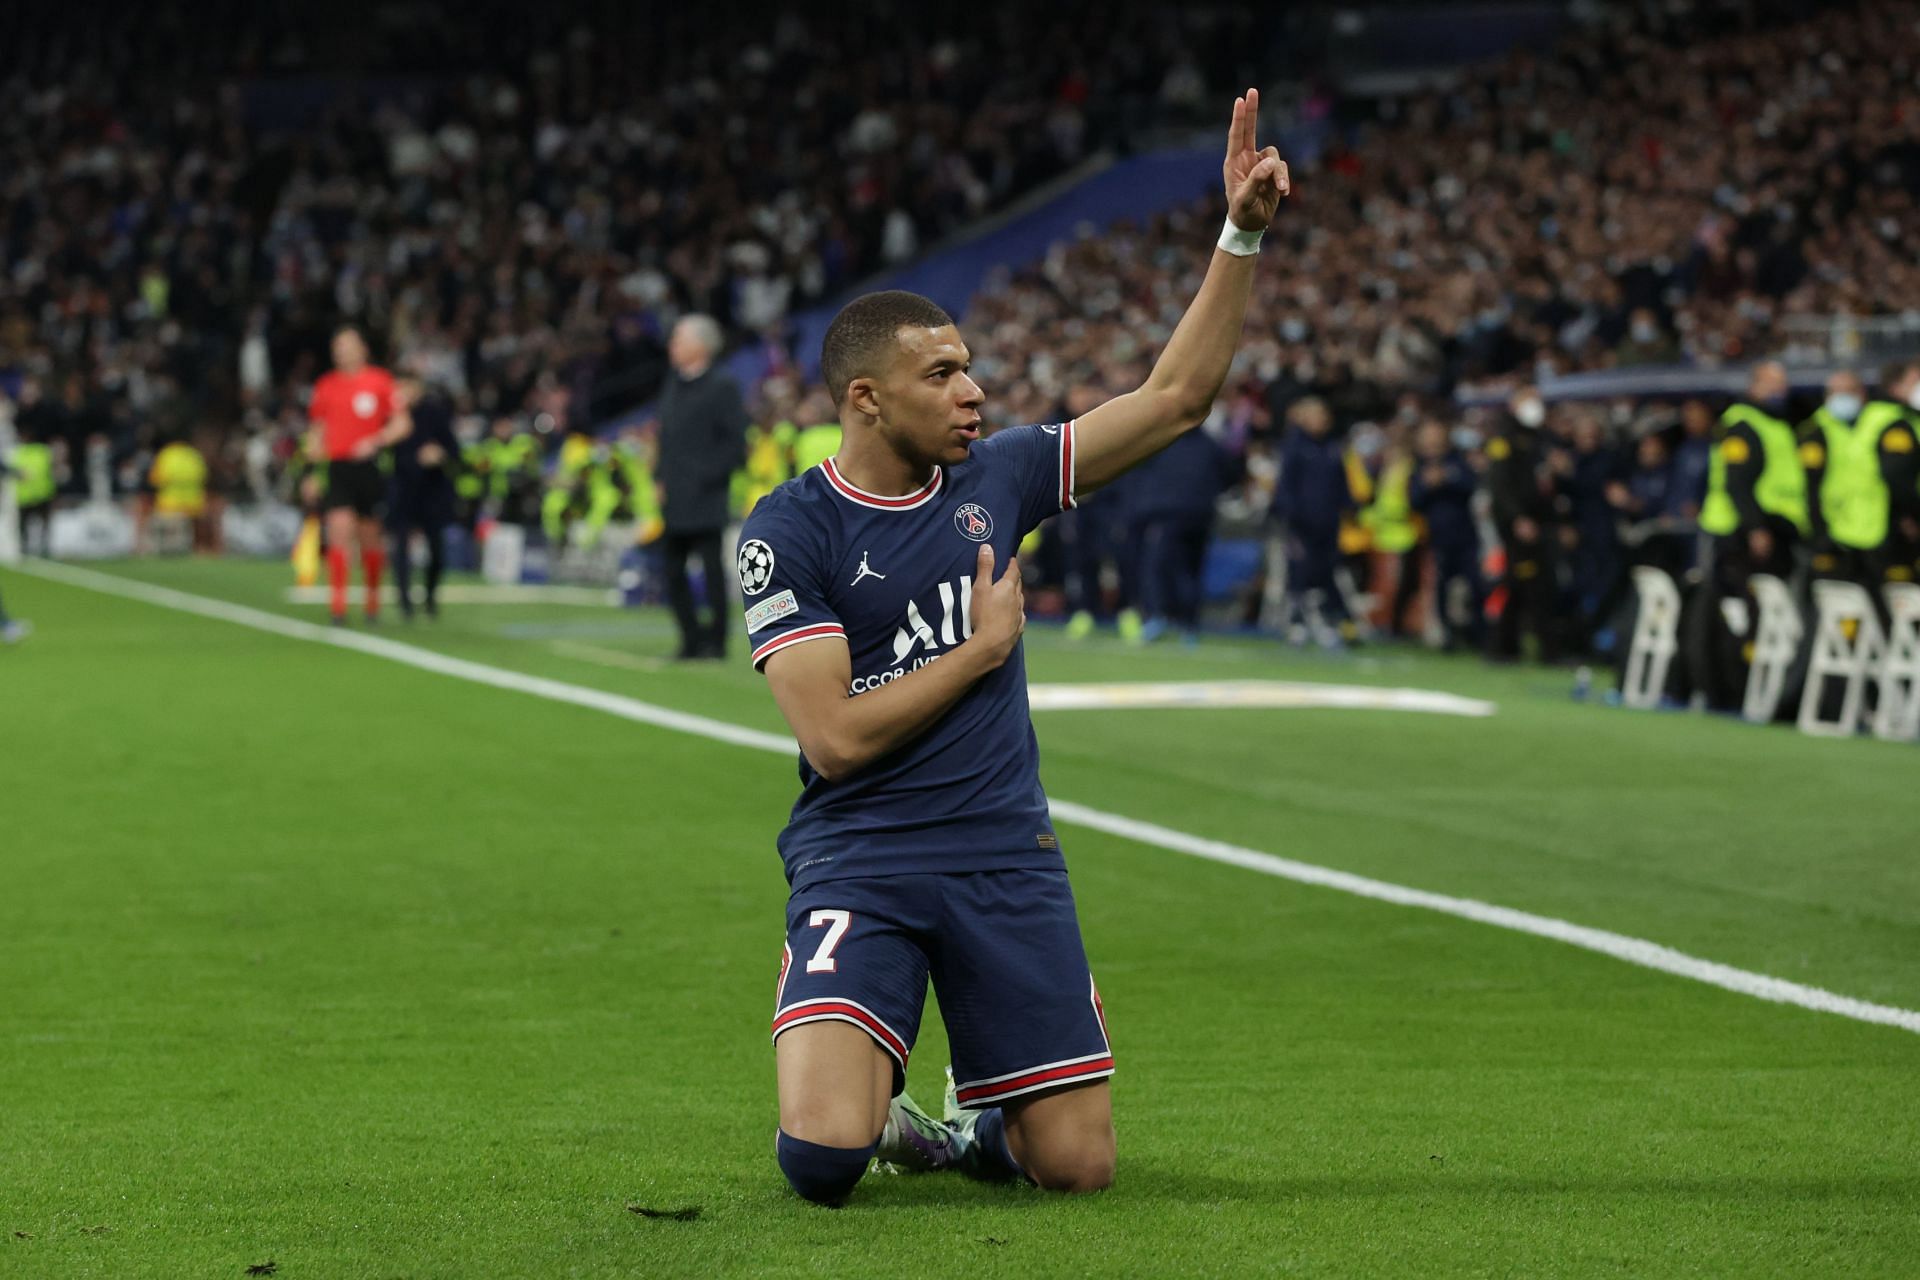 Mbappe is fast becoming a legend of the game